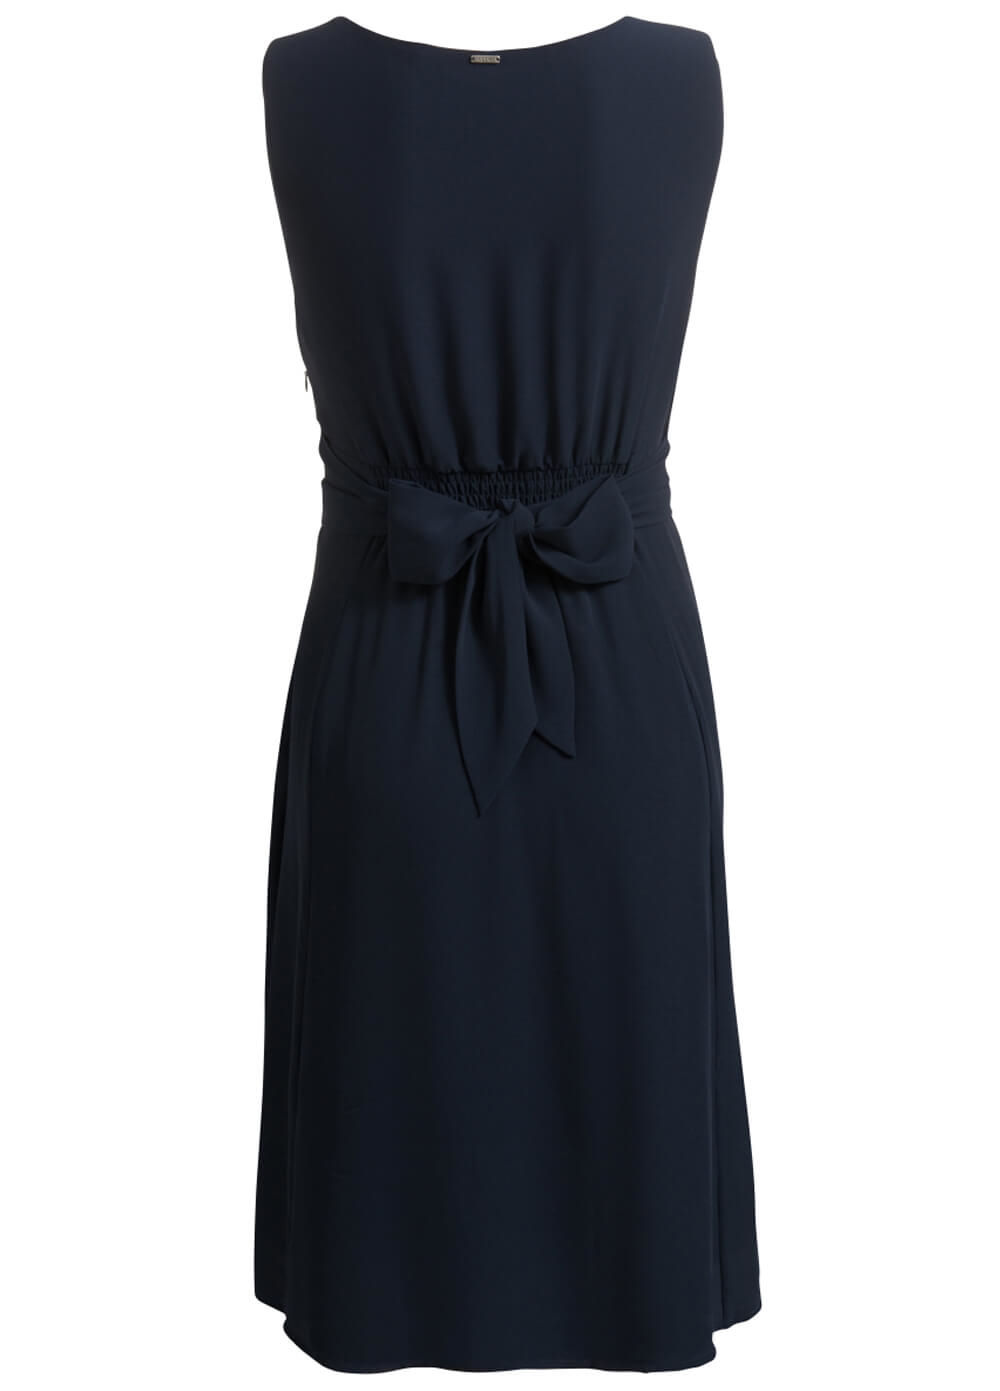 Liane Maternity Cocktail Dress in Dark Blue by Noppies